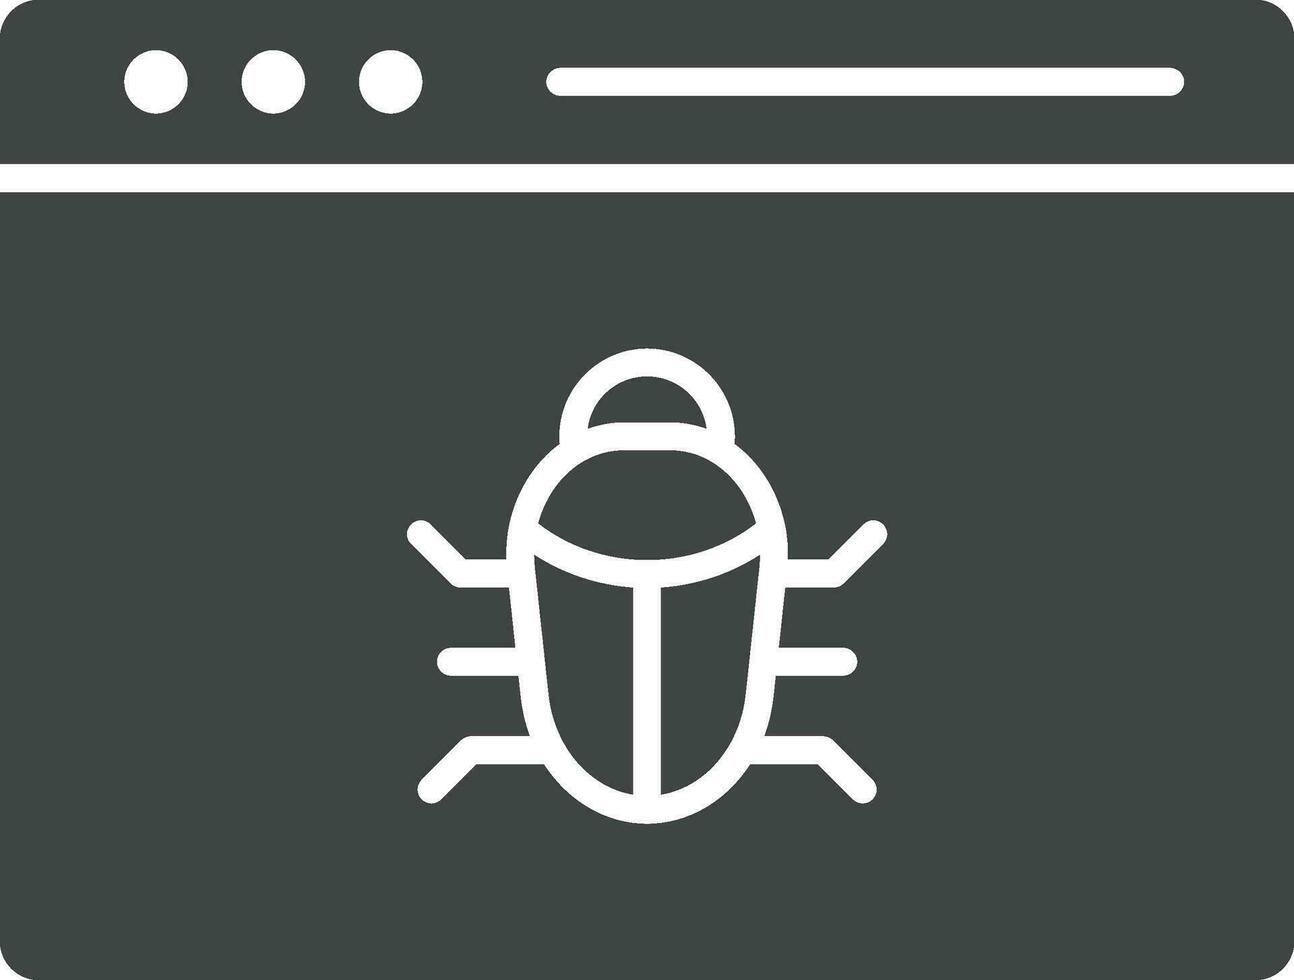 Bug Fixing icon vector image. Suitable for mobile apps, web apps and print media.